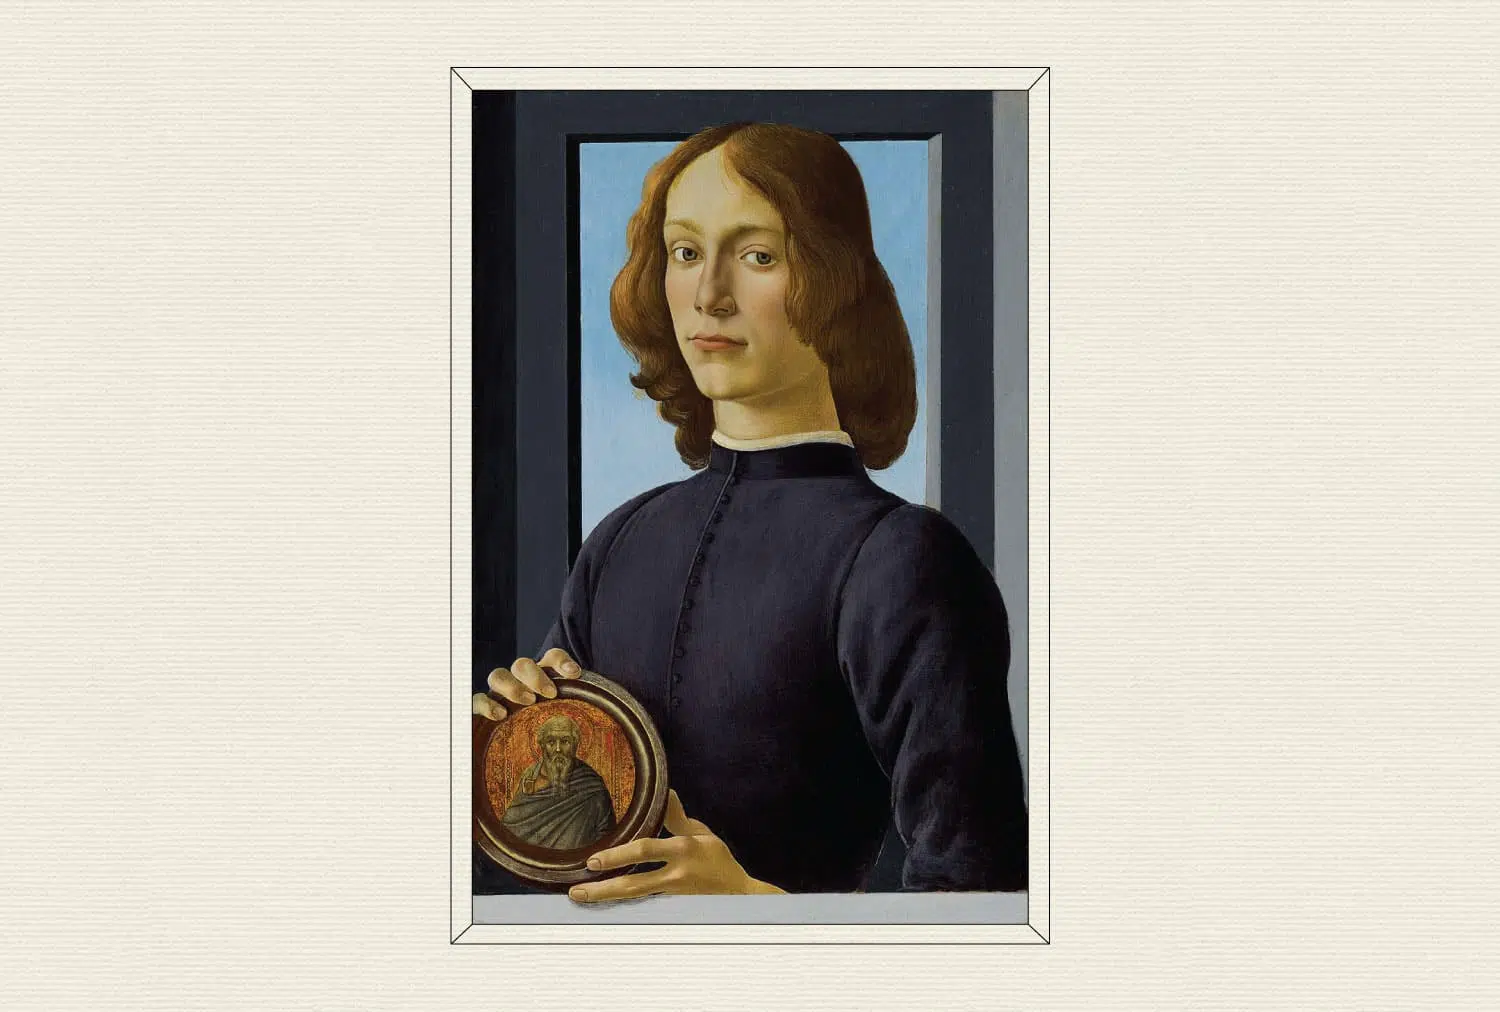 Portrait of a Young Man Holding a Roundel, 1480, by Sandro Botticelli